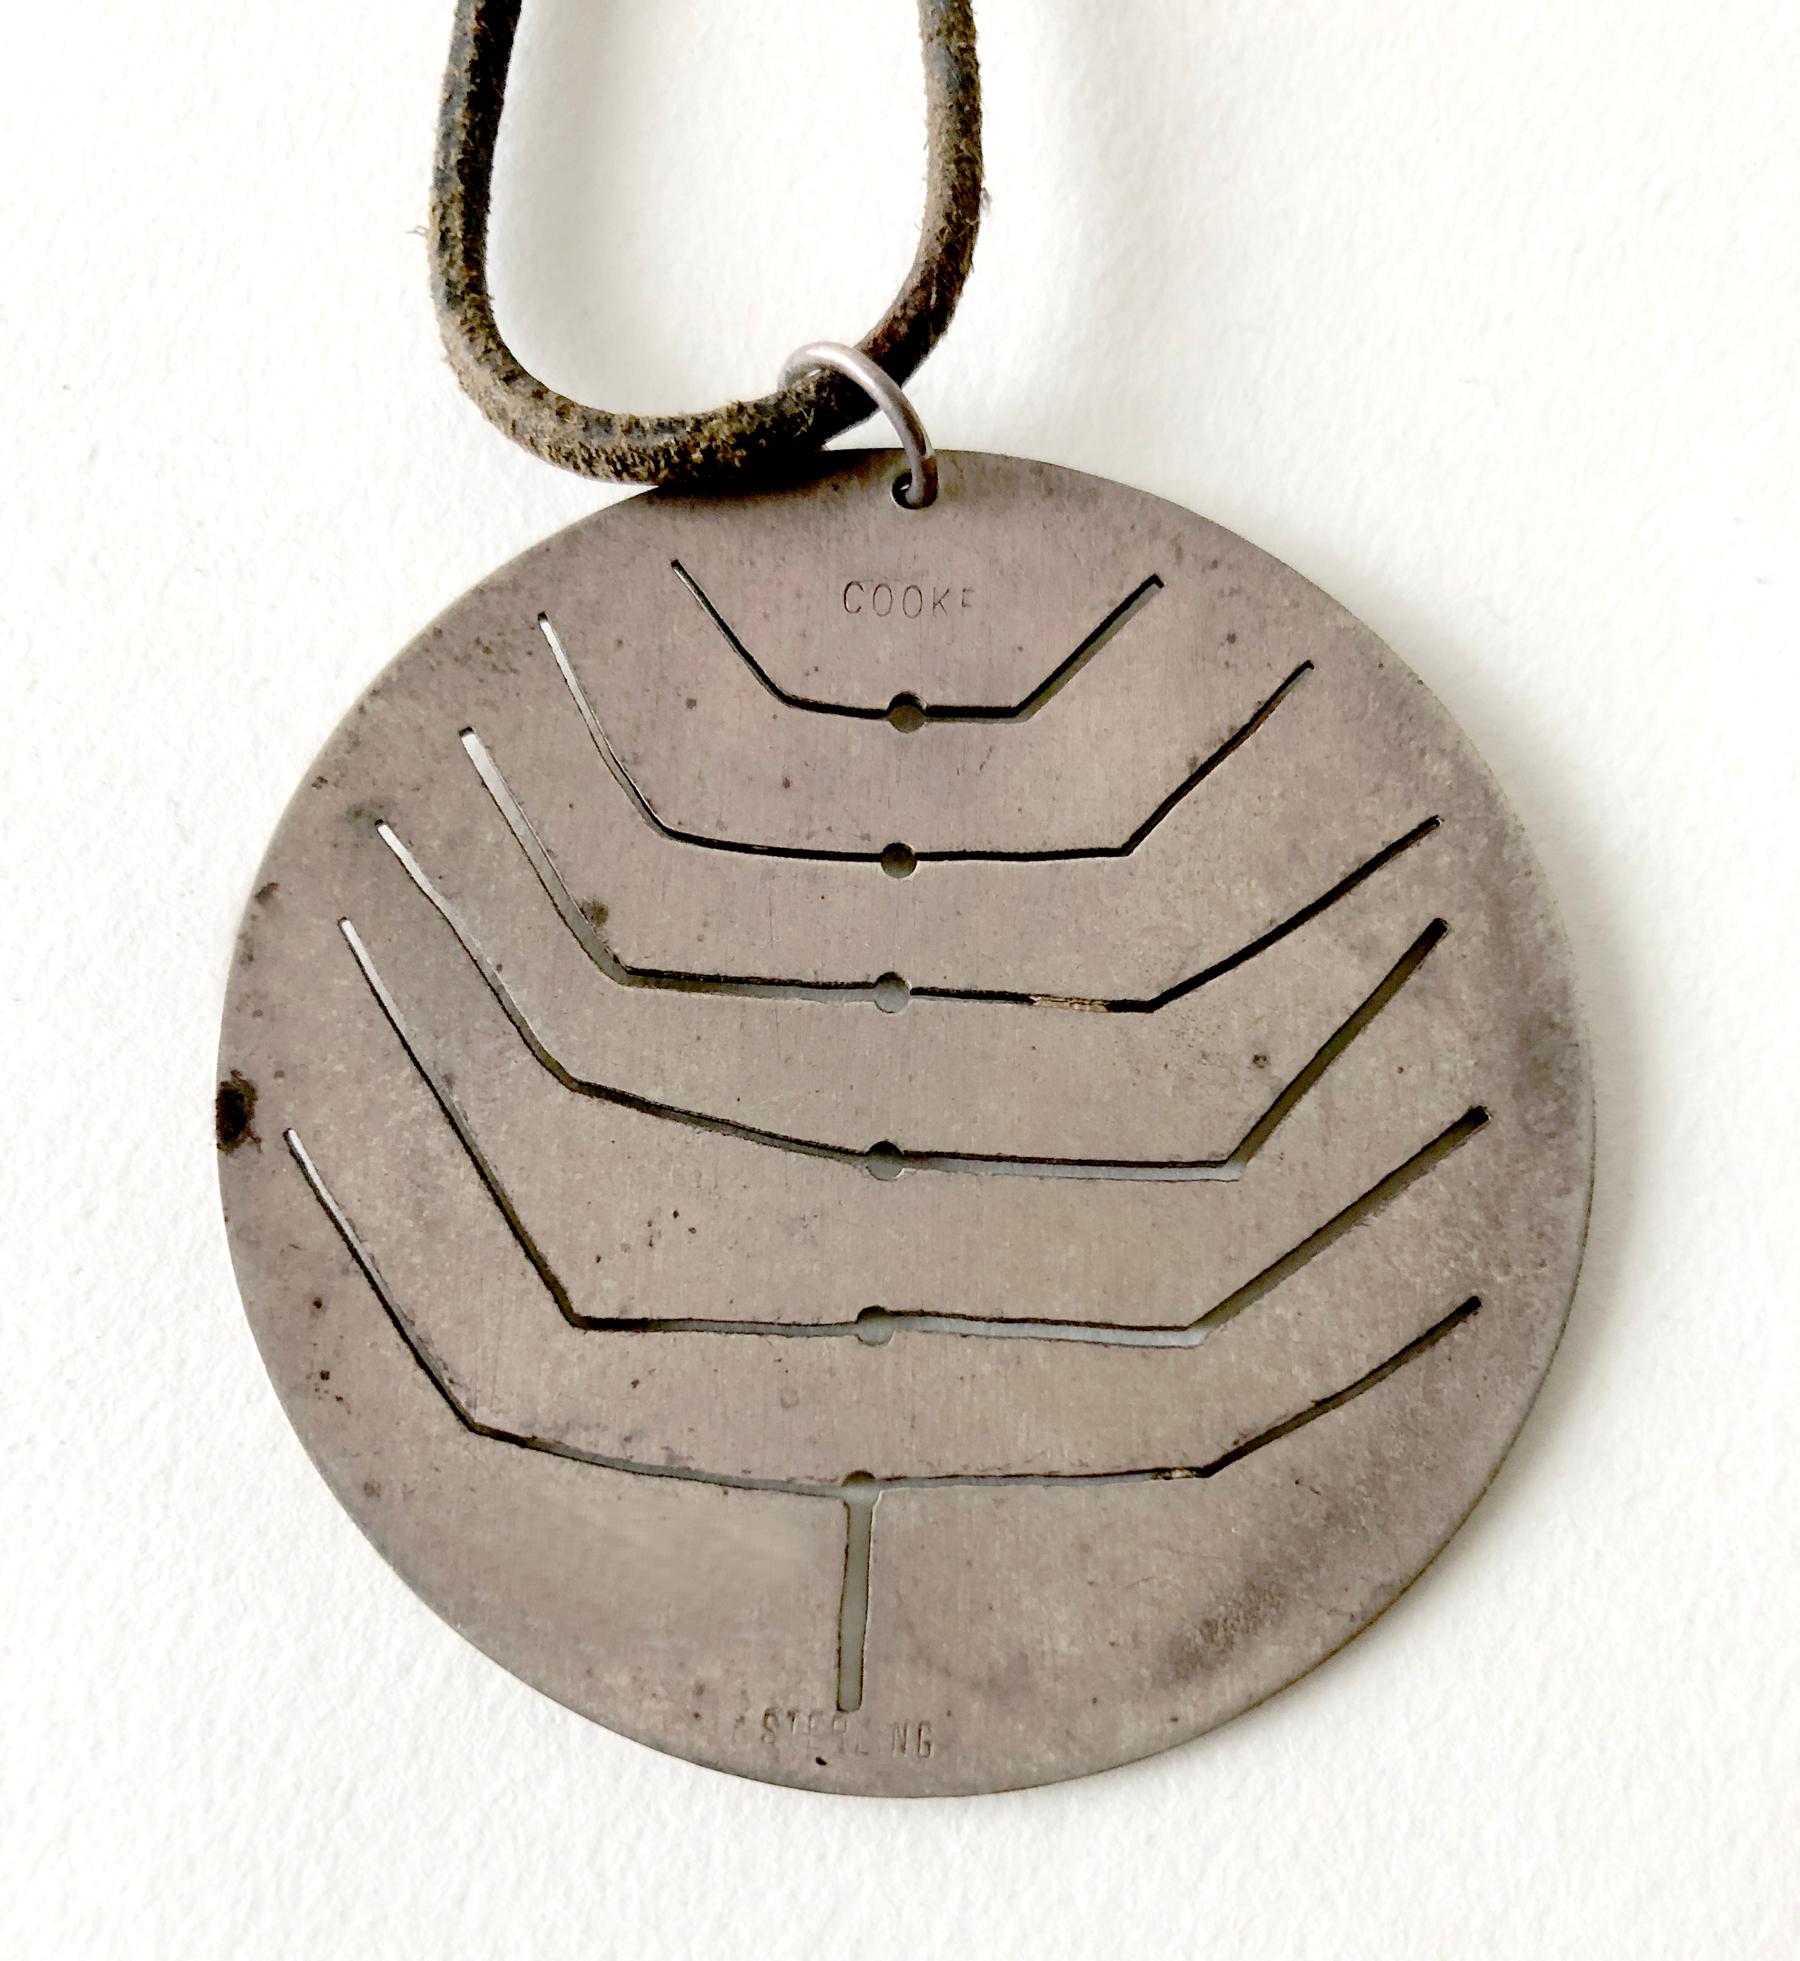 Modernist Early Betty Cooke Sterling Silver Pendant on Original Leather Cord